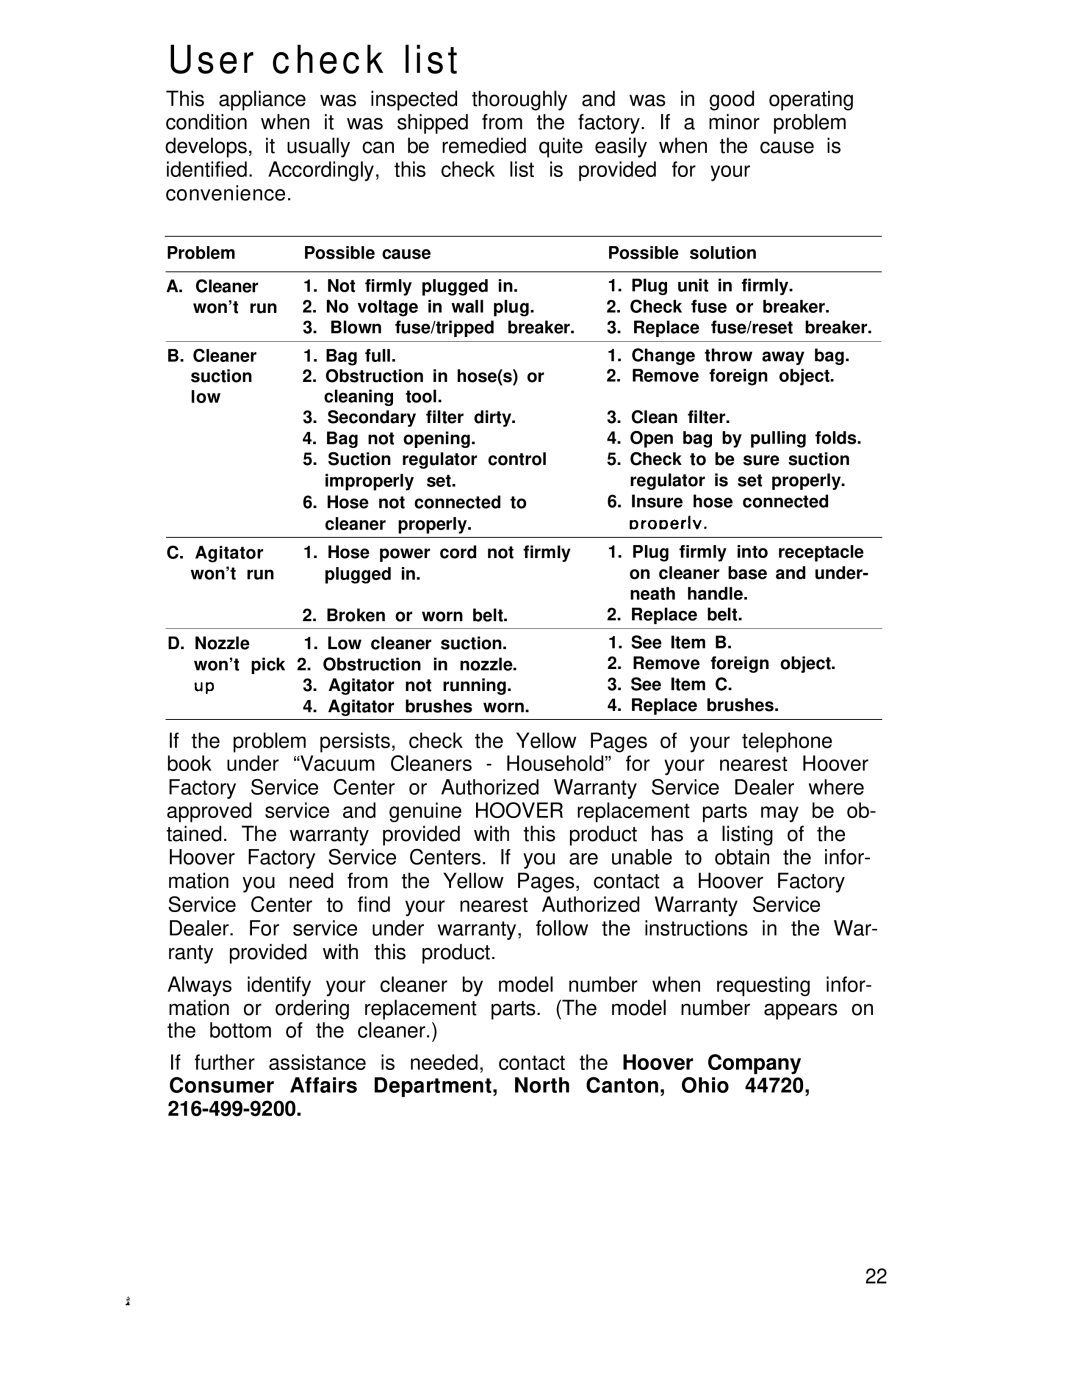 Hoover lV manual User check list, Consumer Affairs Department, North Canton, Ohio 44720 